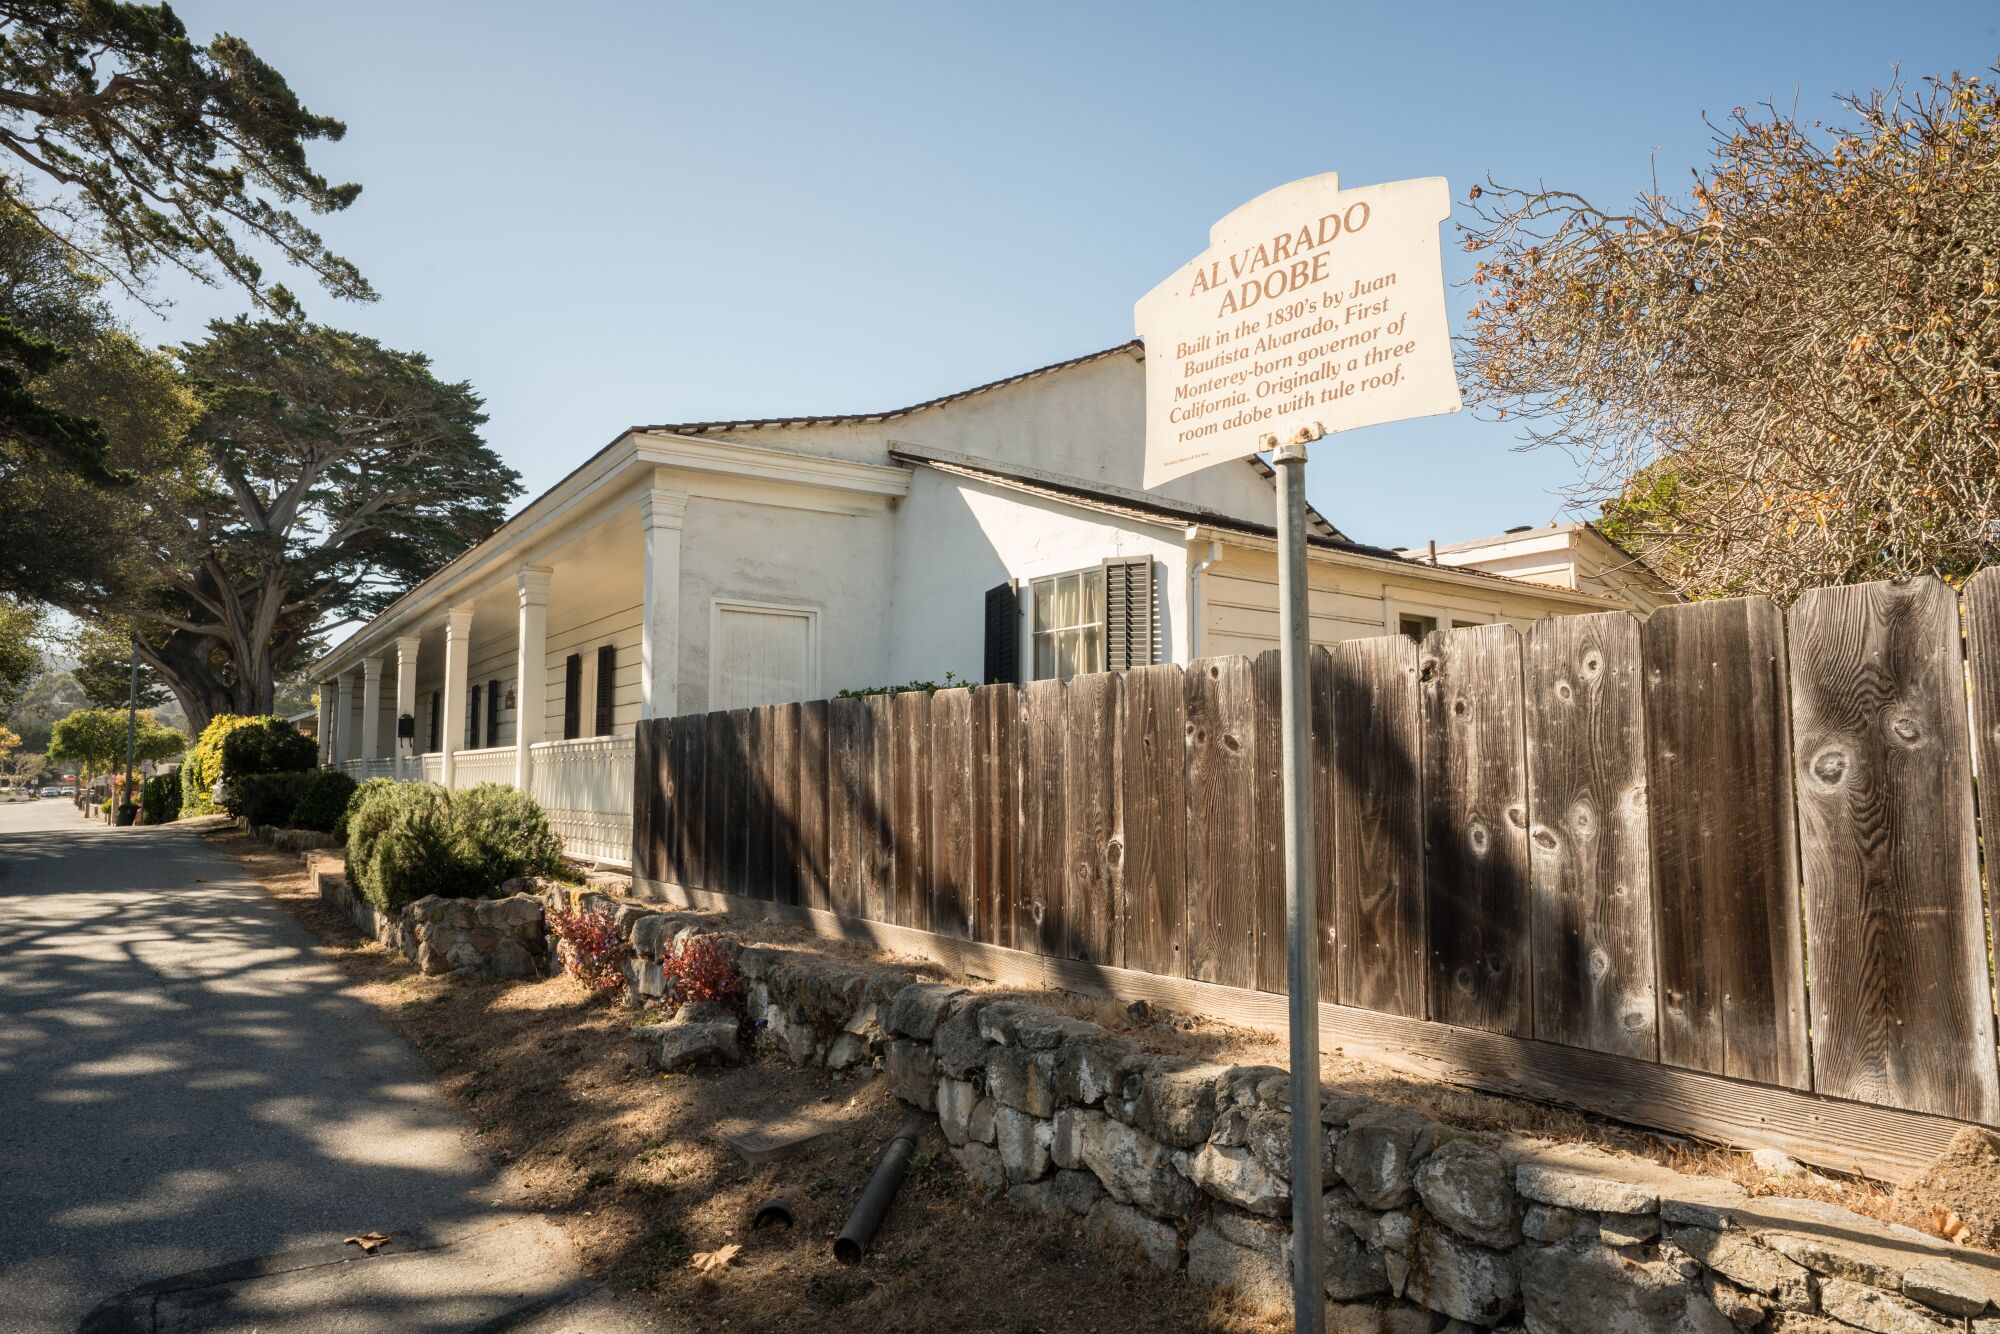 A state-owned historic adobe in Monterey is rented for $211 a month by a parks superintendent